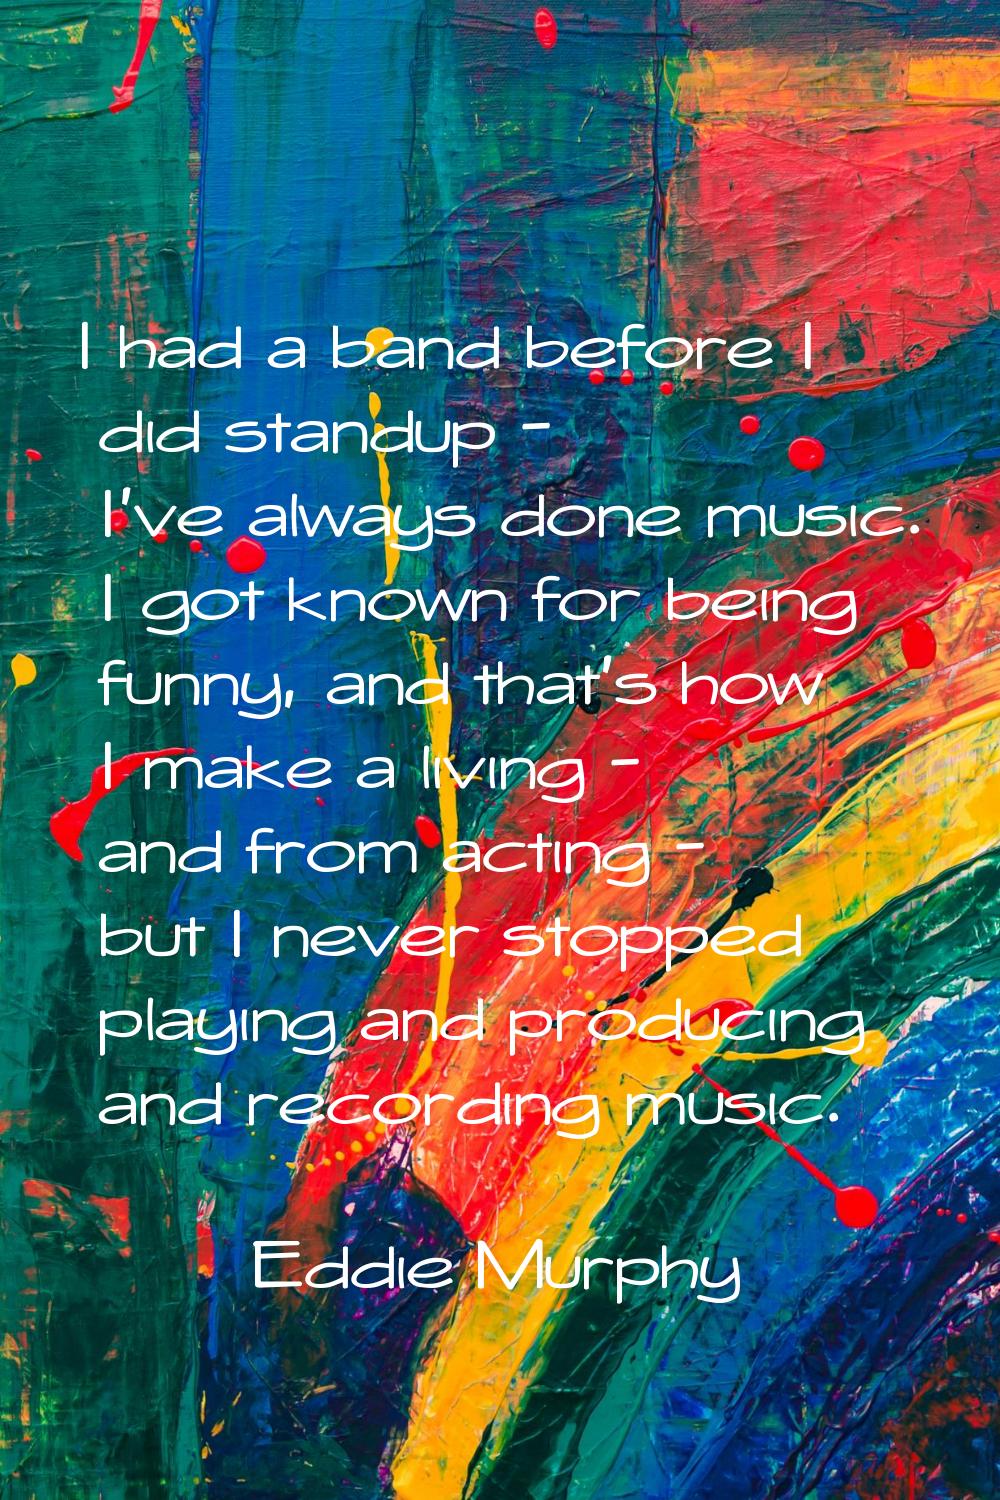 I had a band before I did standup - I've always done music. I got known for being funny, and that's